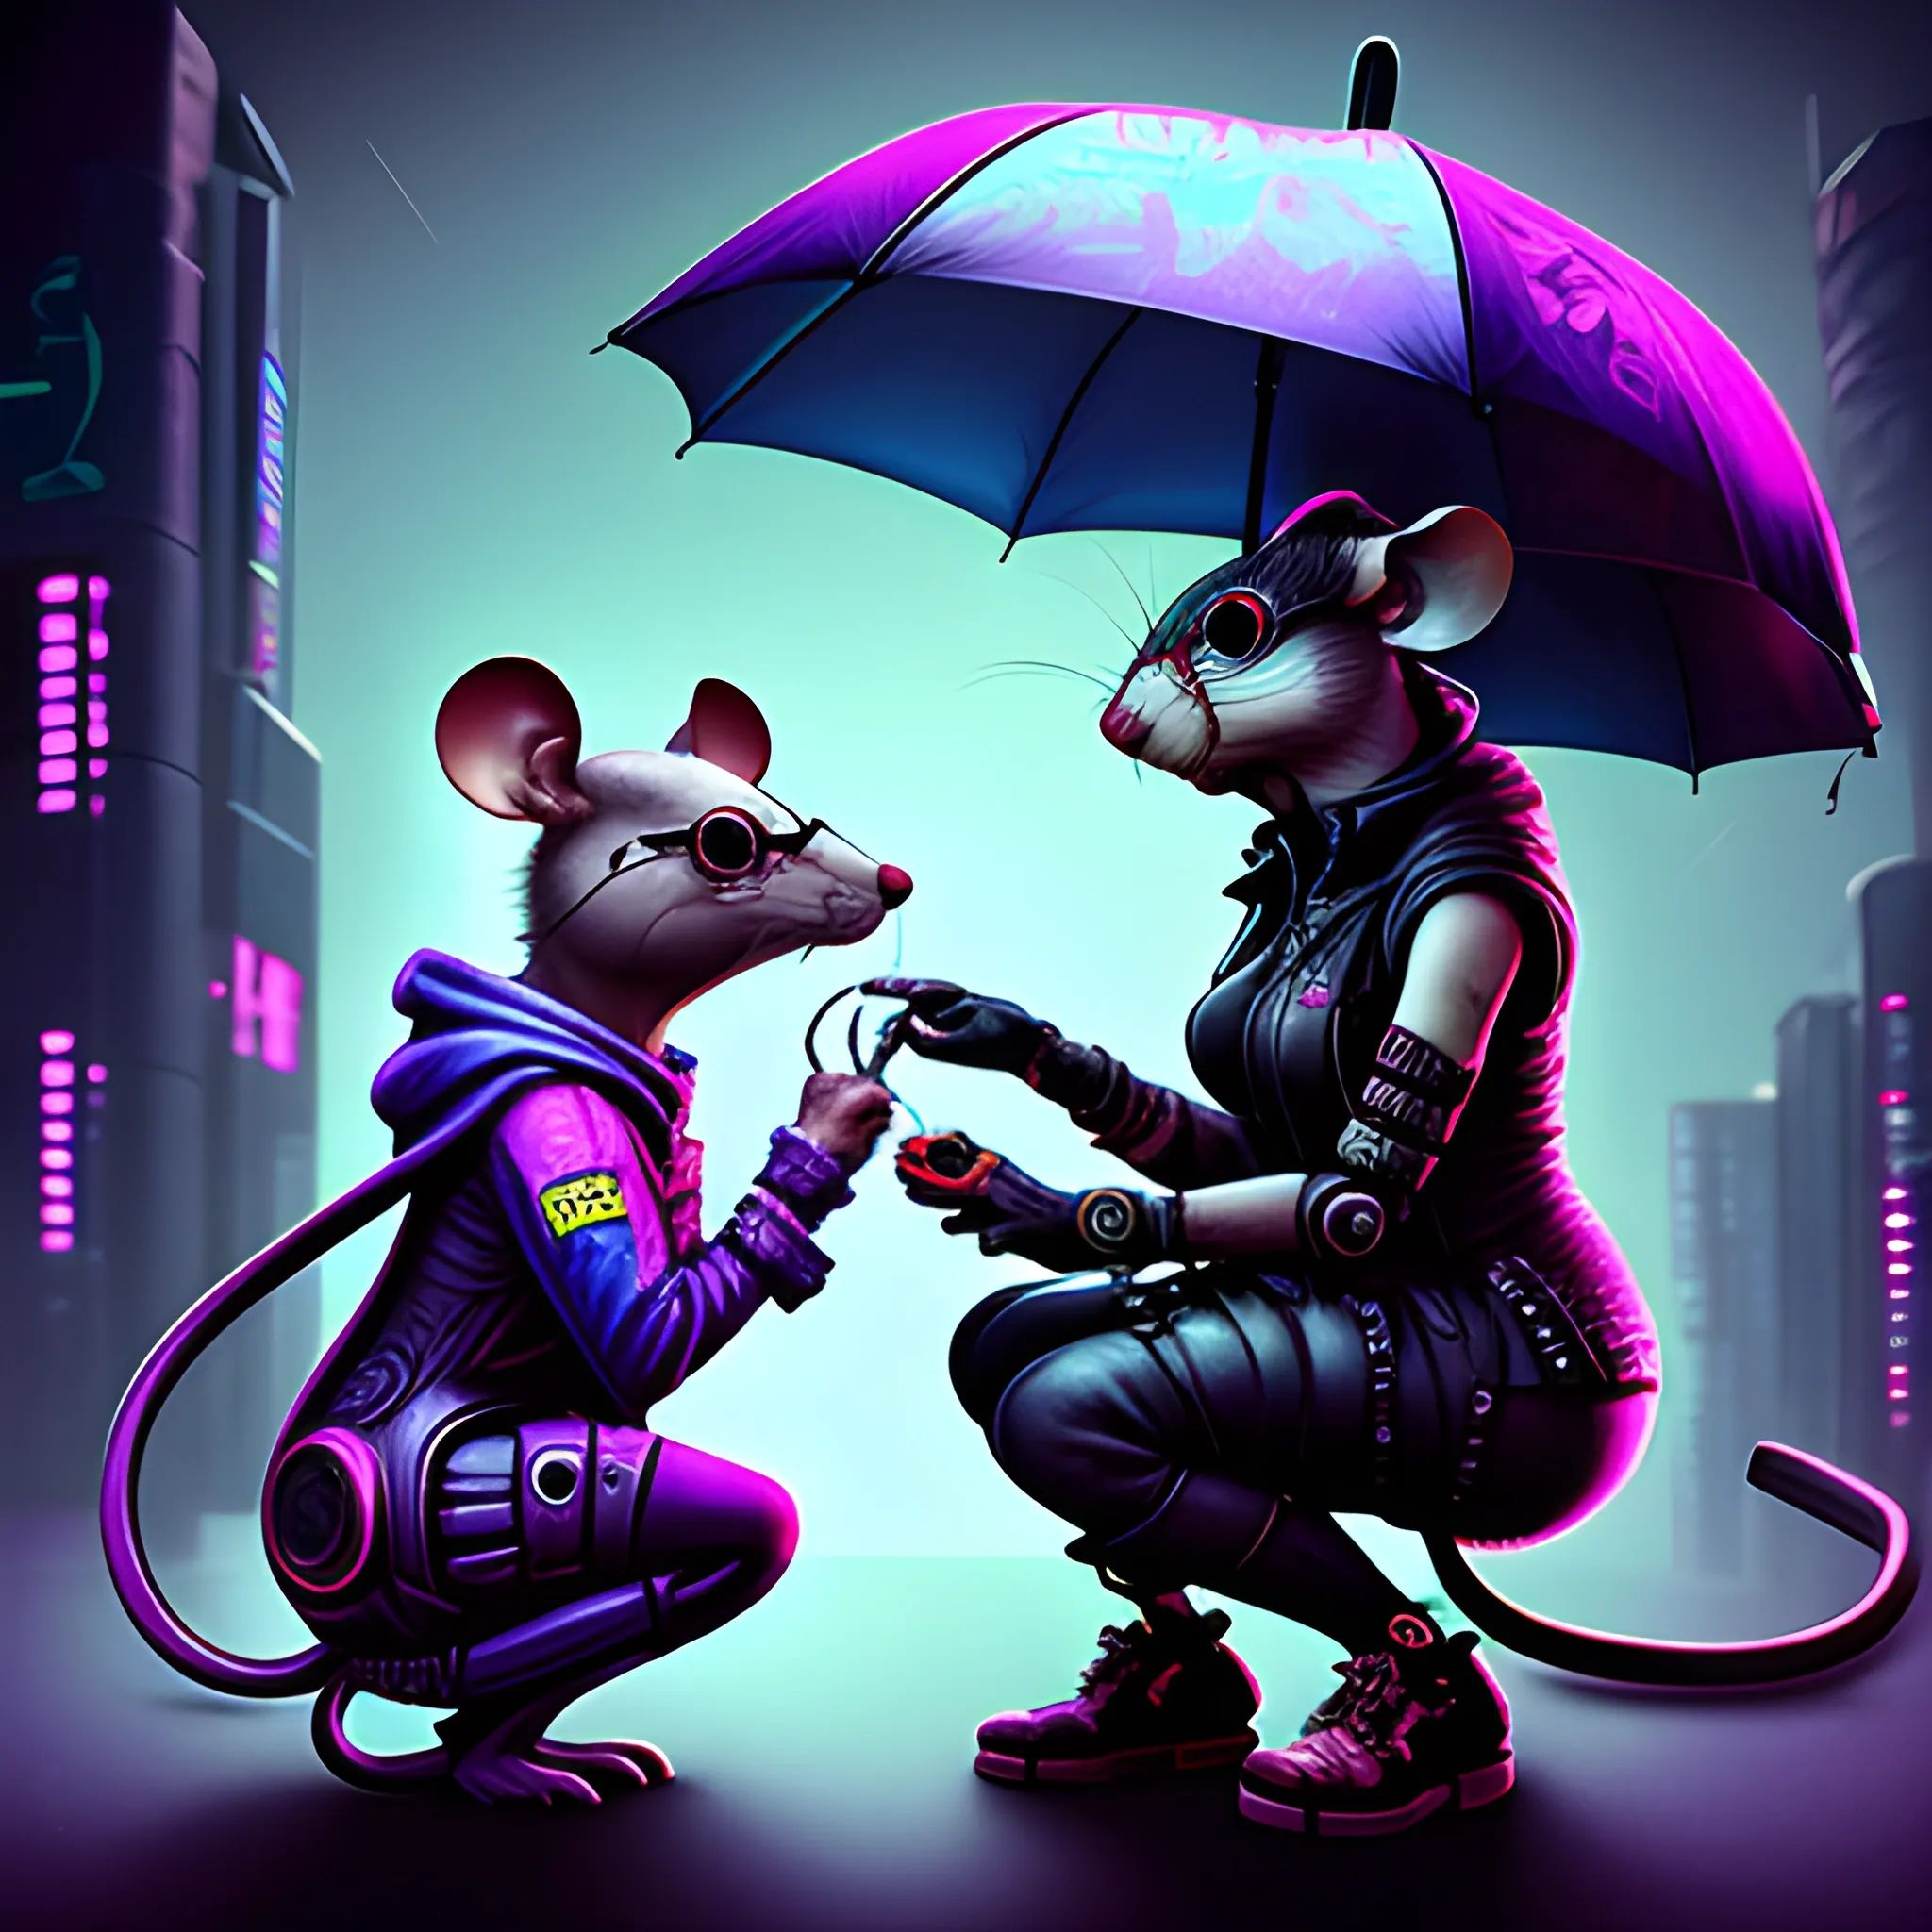 

cyberpunk, mouse, with glasses, on knees, gives engagement ring to cyberpunk rat female, with umbrella, Trippy